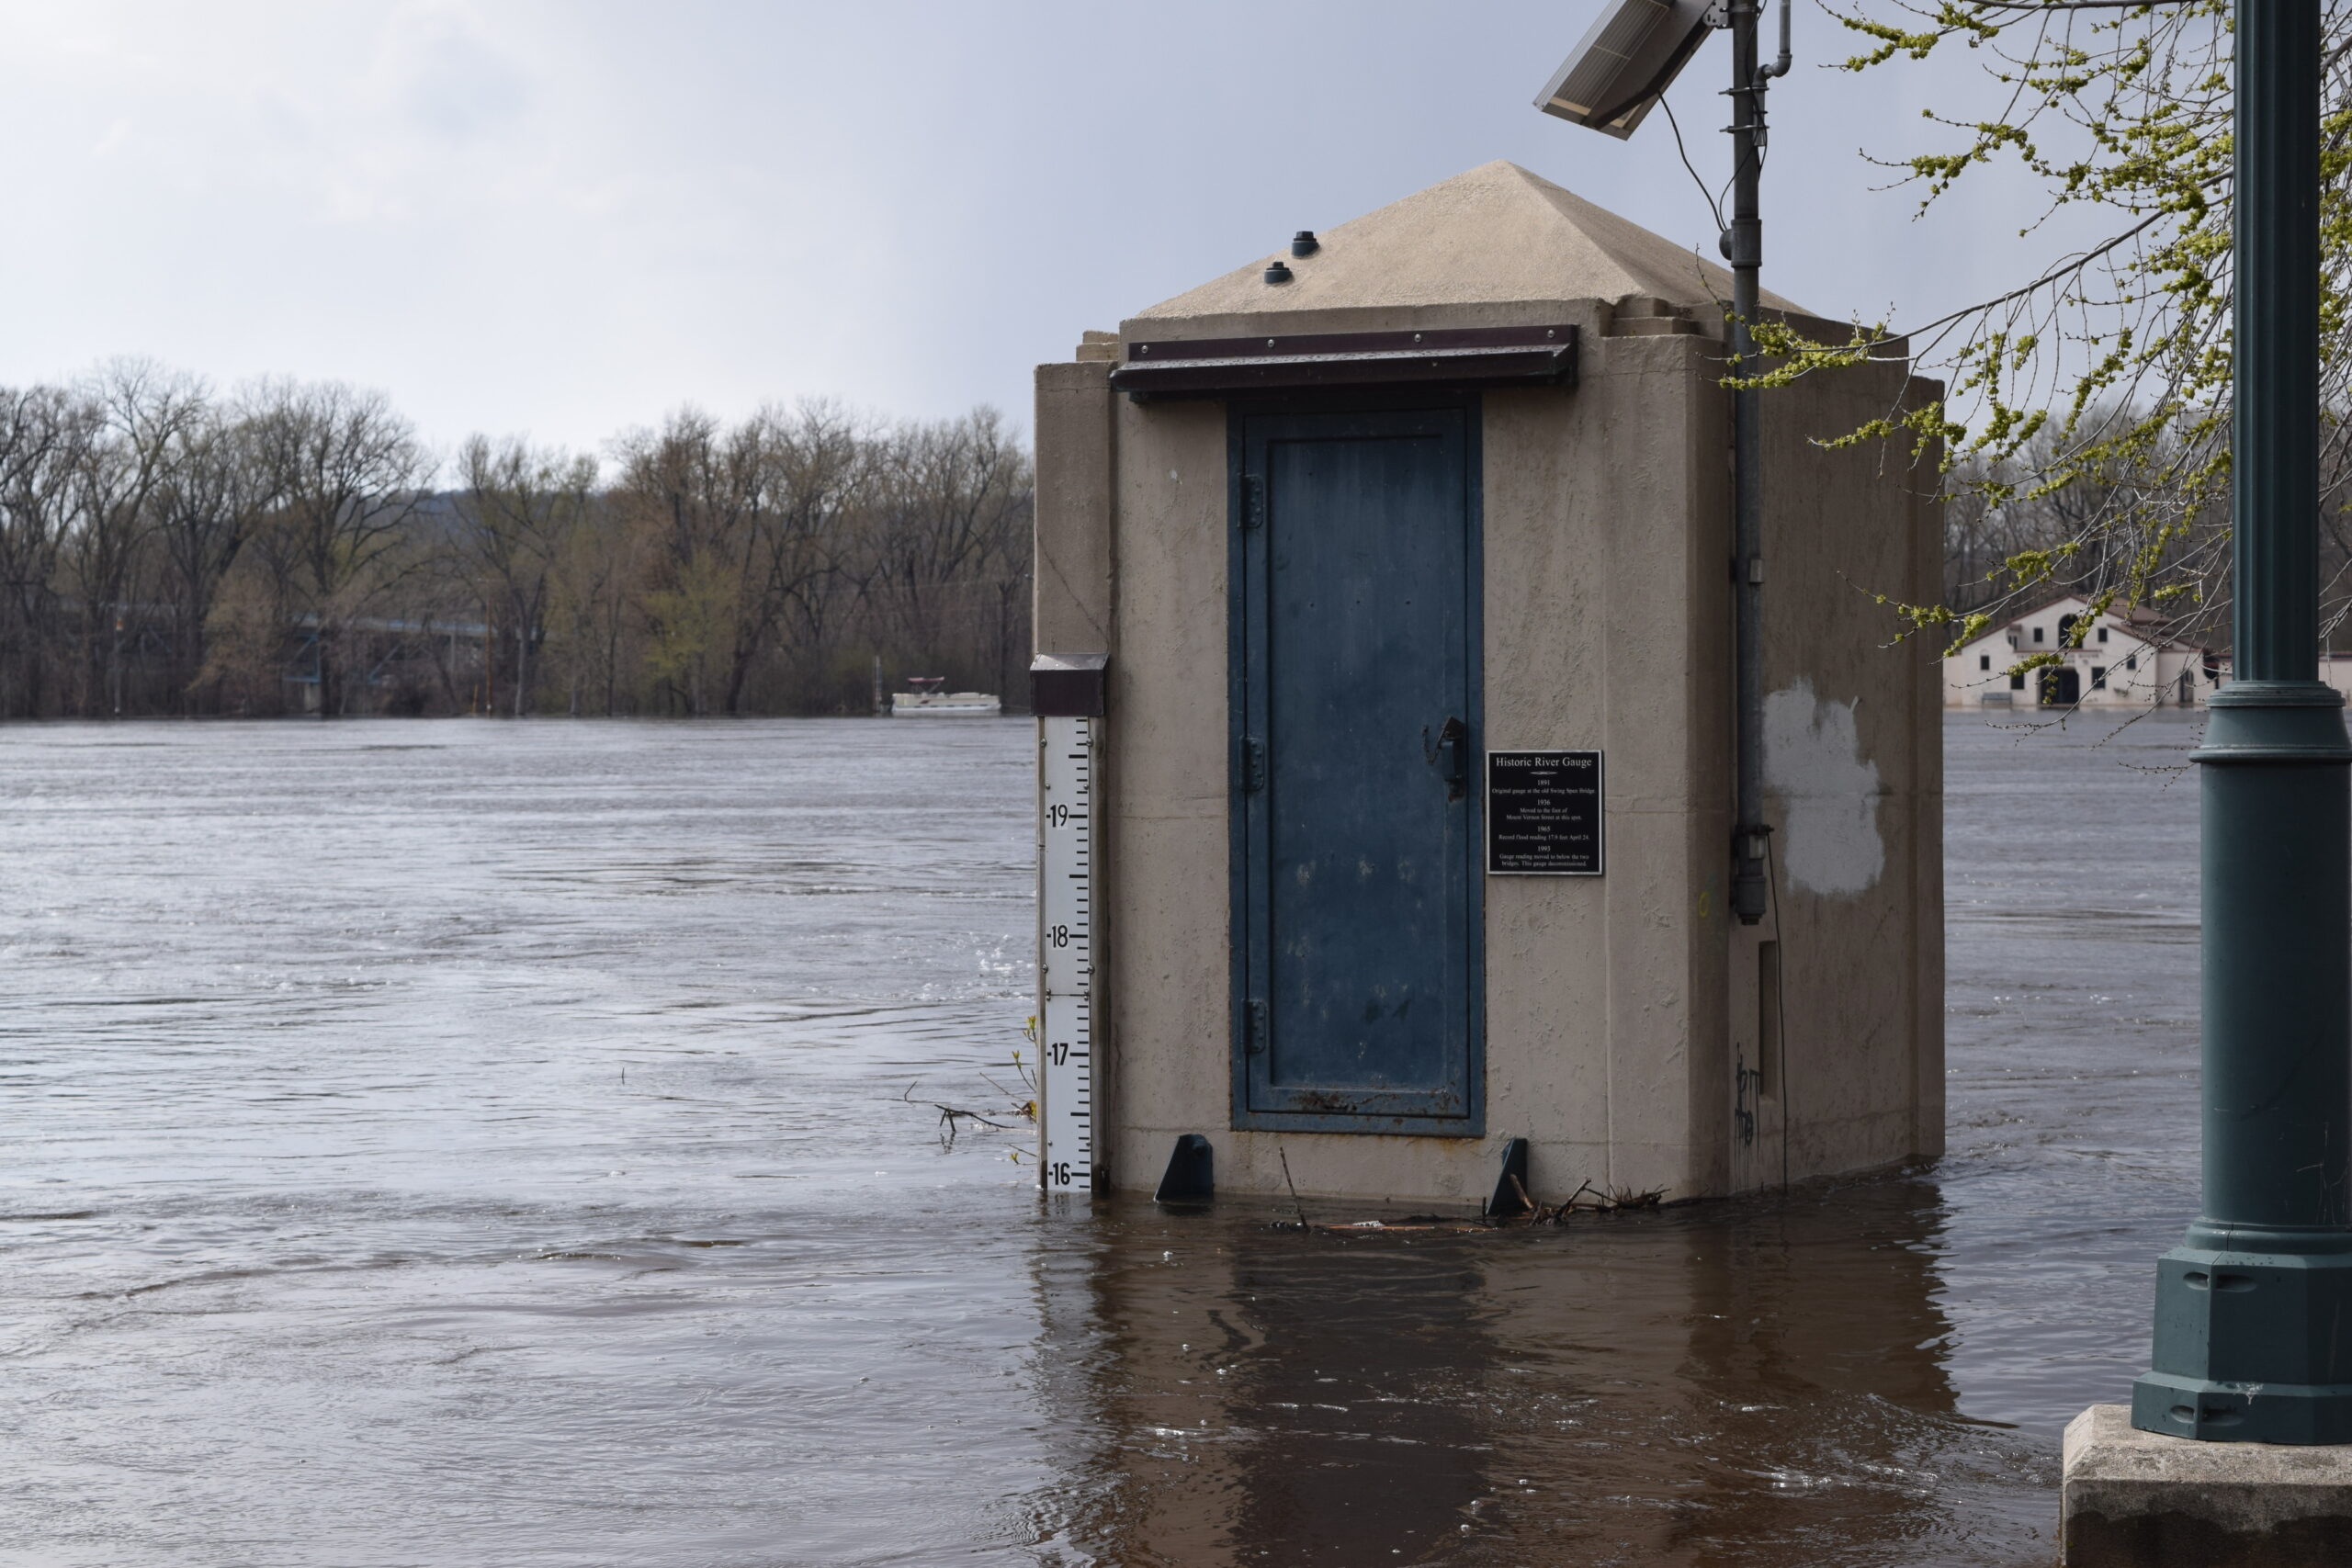 A river gauge shows floodwaters nearing 16 feet at a La Crosse park